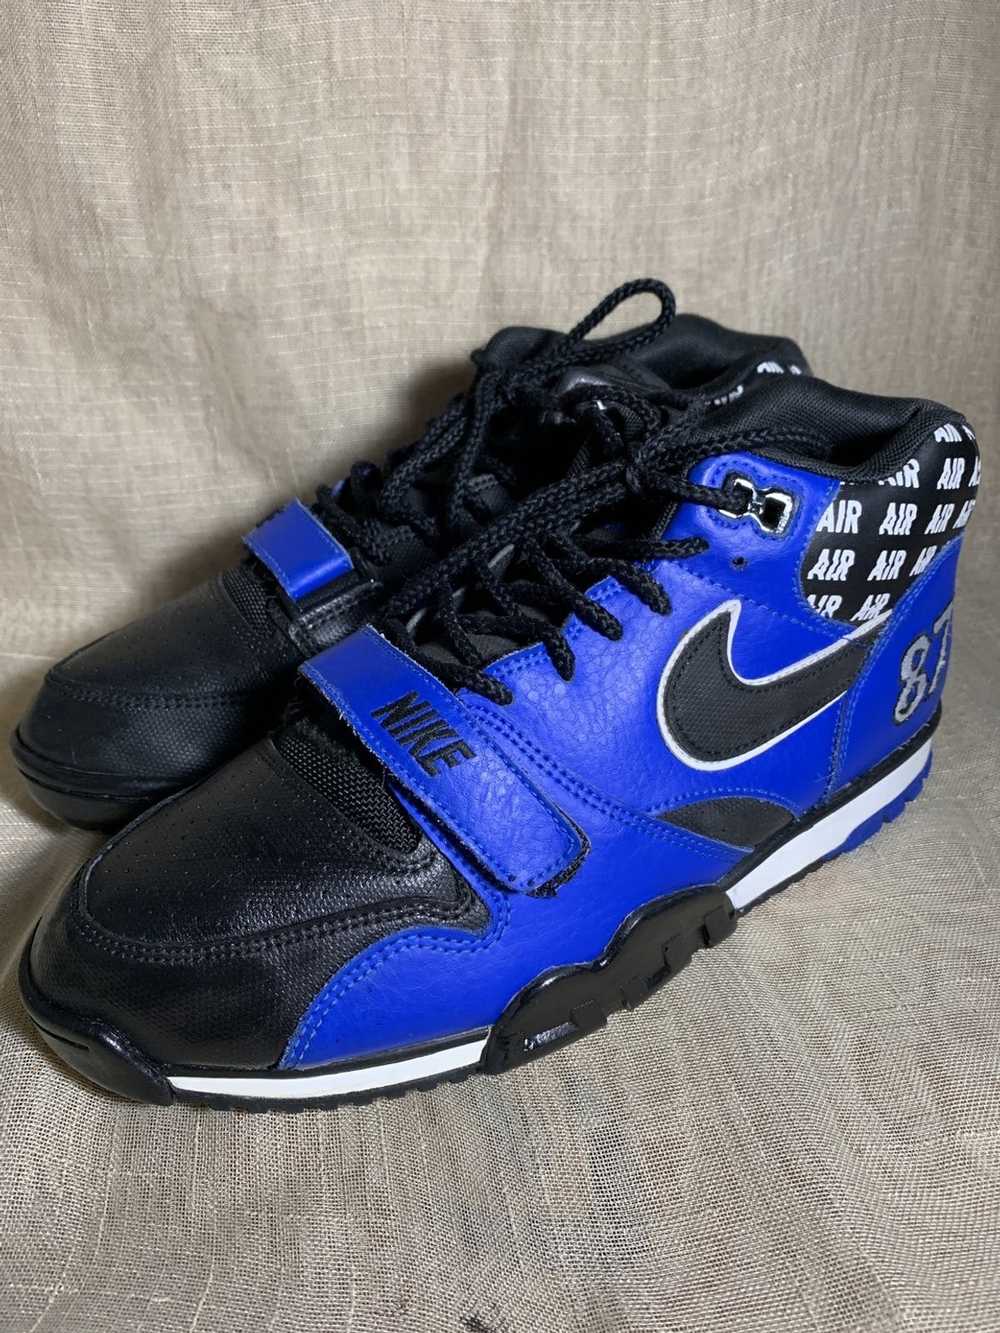 Nike Air Trainer 1 Mid SOA Pack - image 2